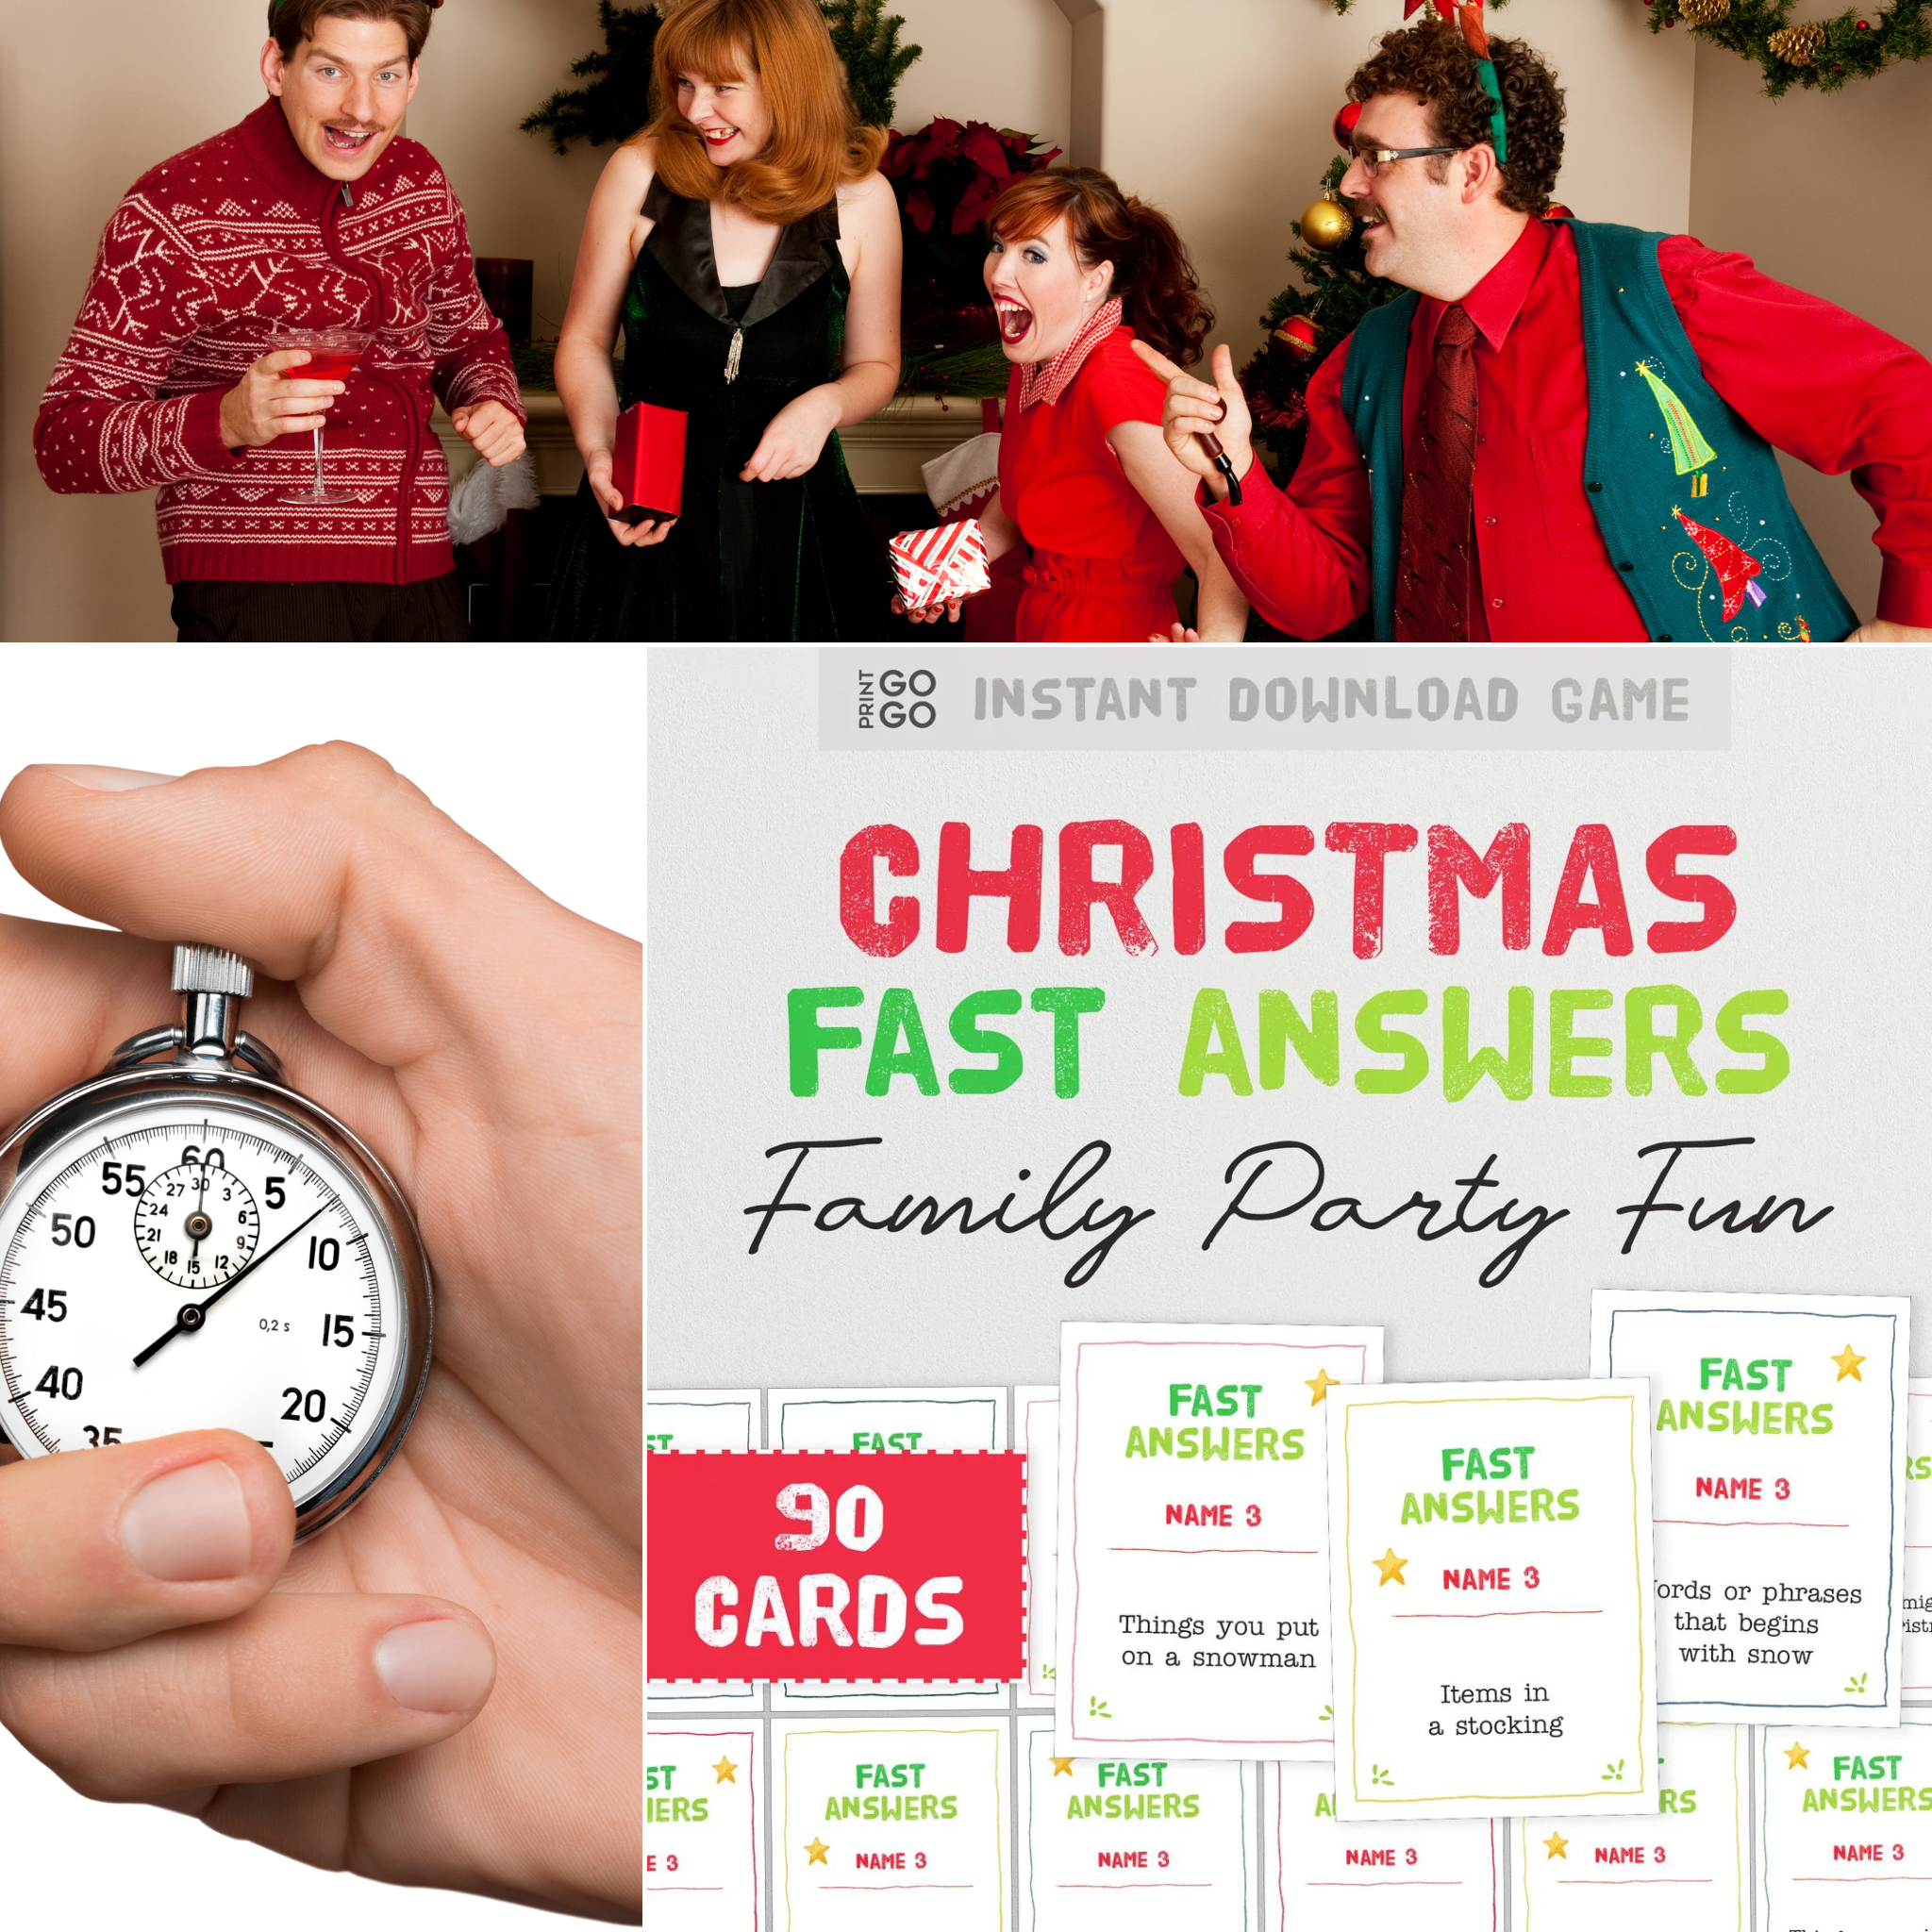 A Festive Frenzy! - the Christmas fast answers party game